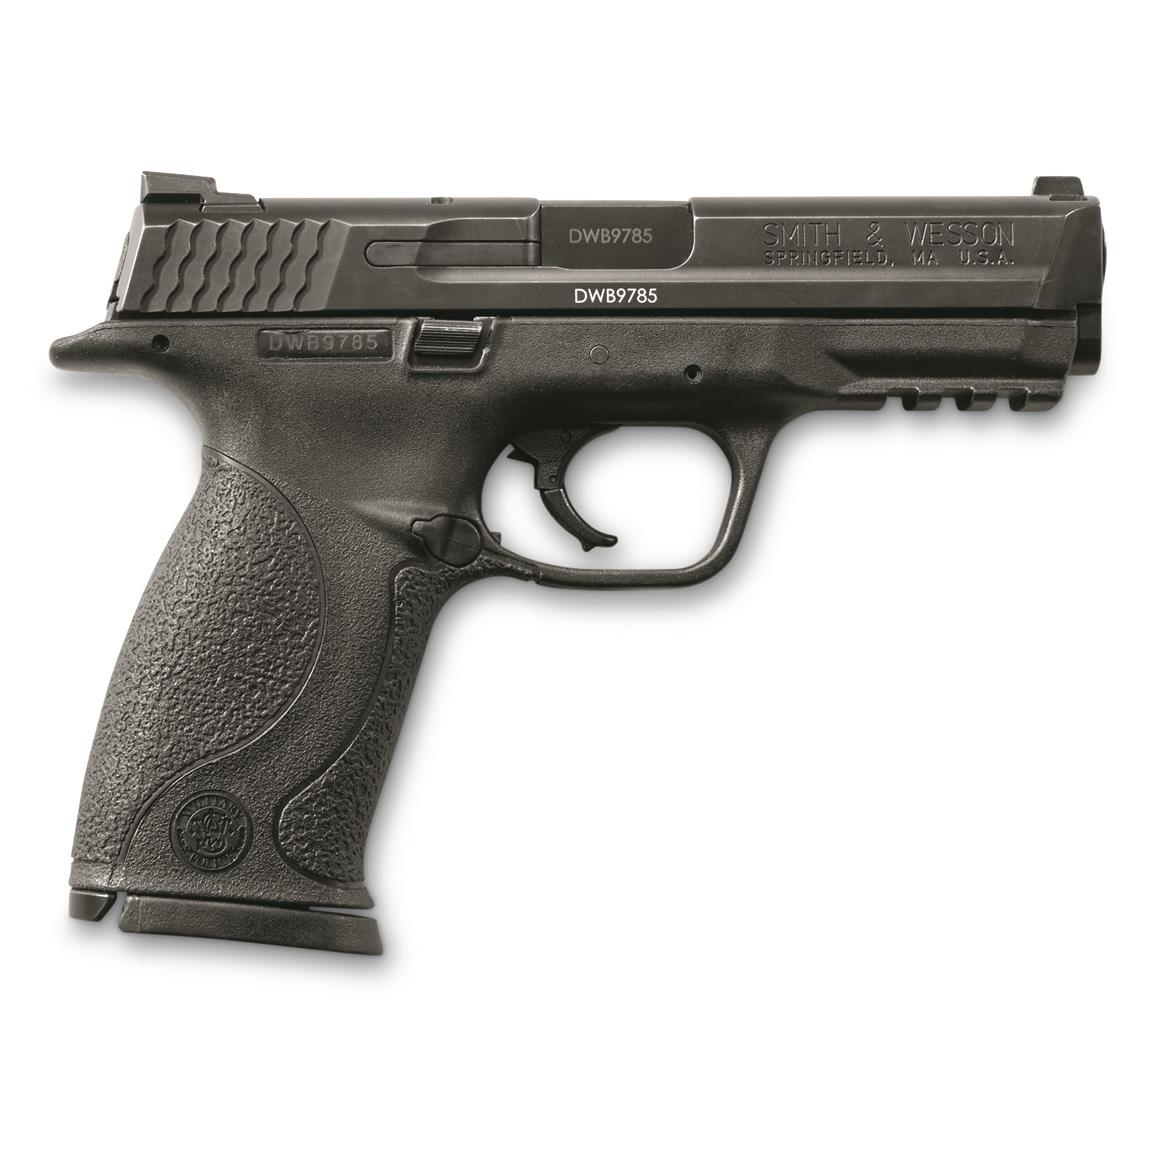 Smith & Wesson M&P 40 Full-Size, Semi-automatic, .40 S&W, 4.25" BBL, 15+1, Law Enforcement Trade-in